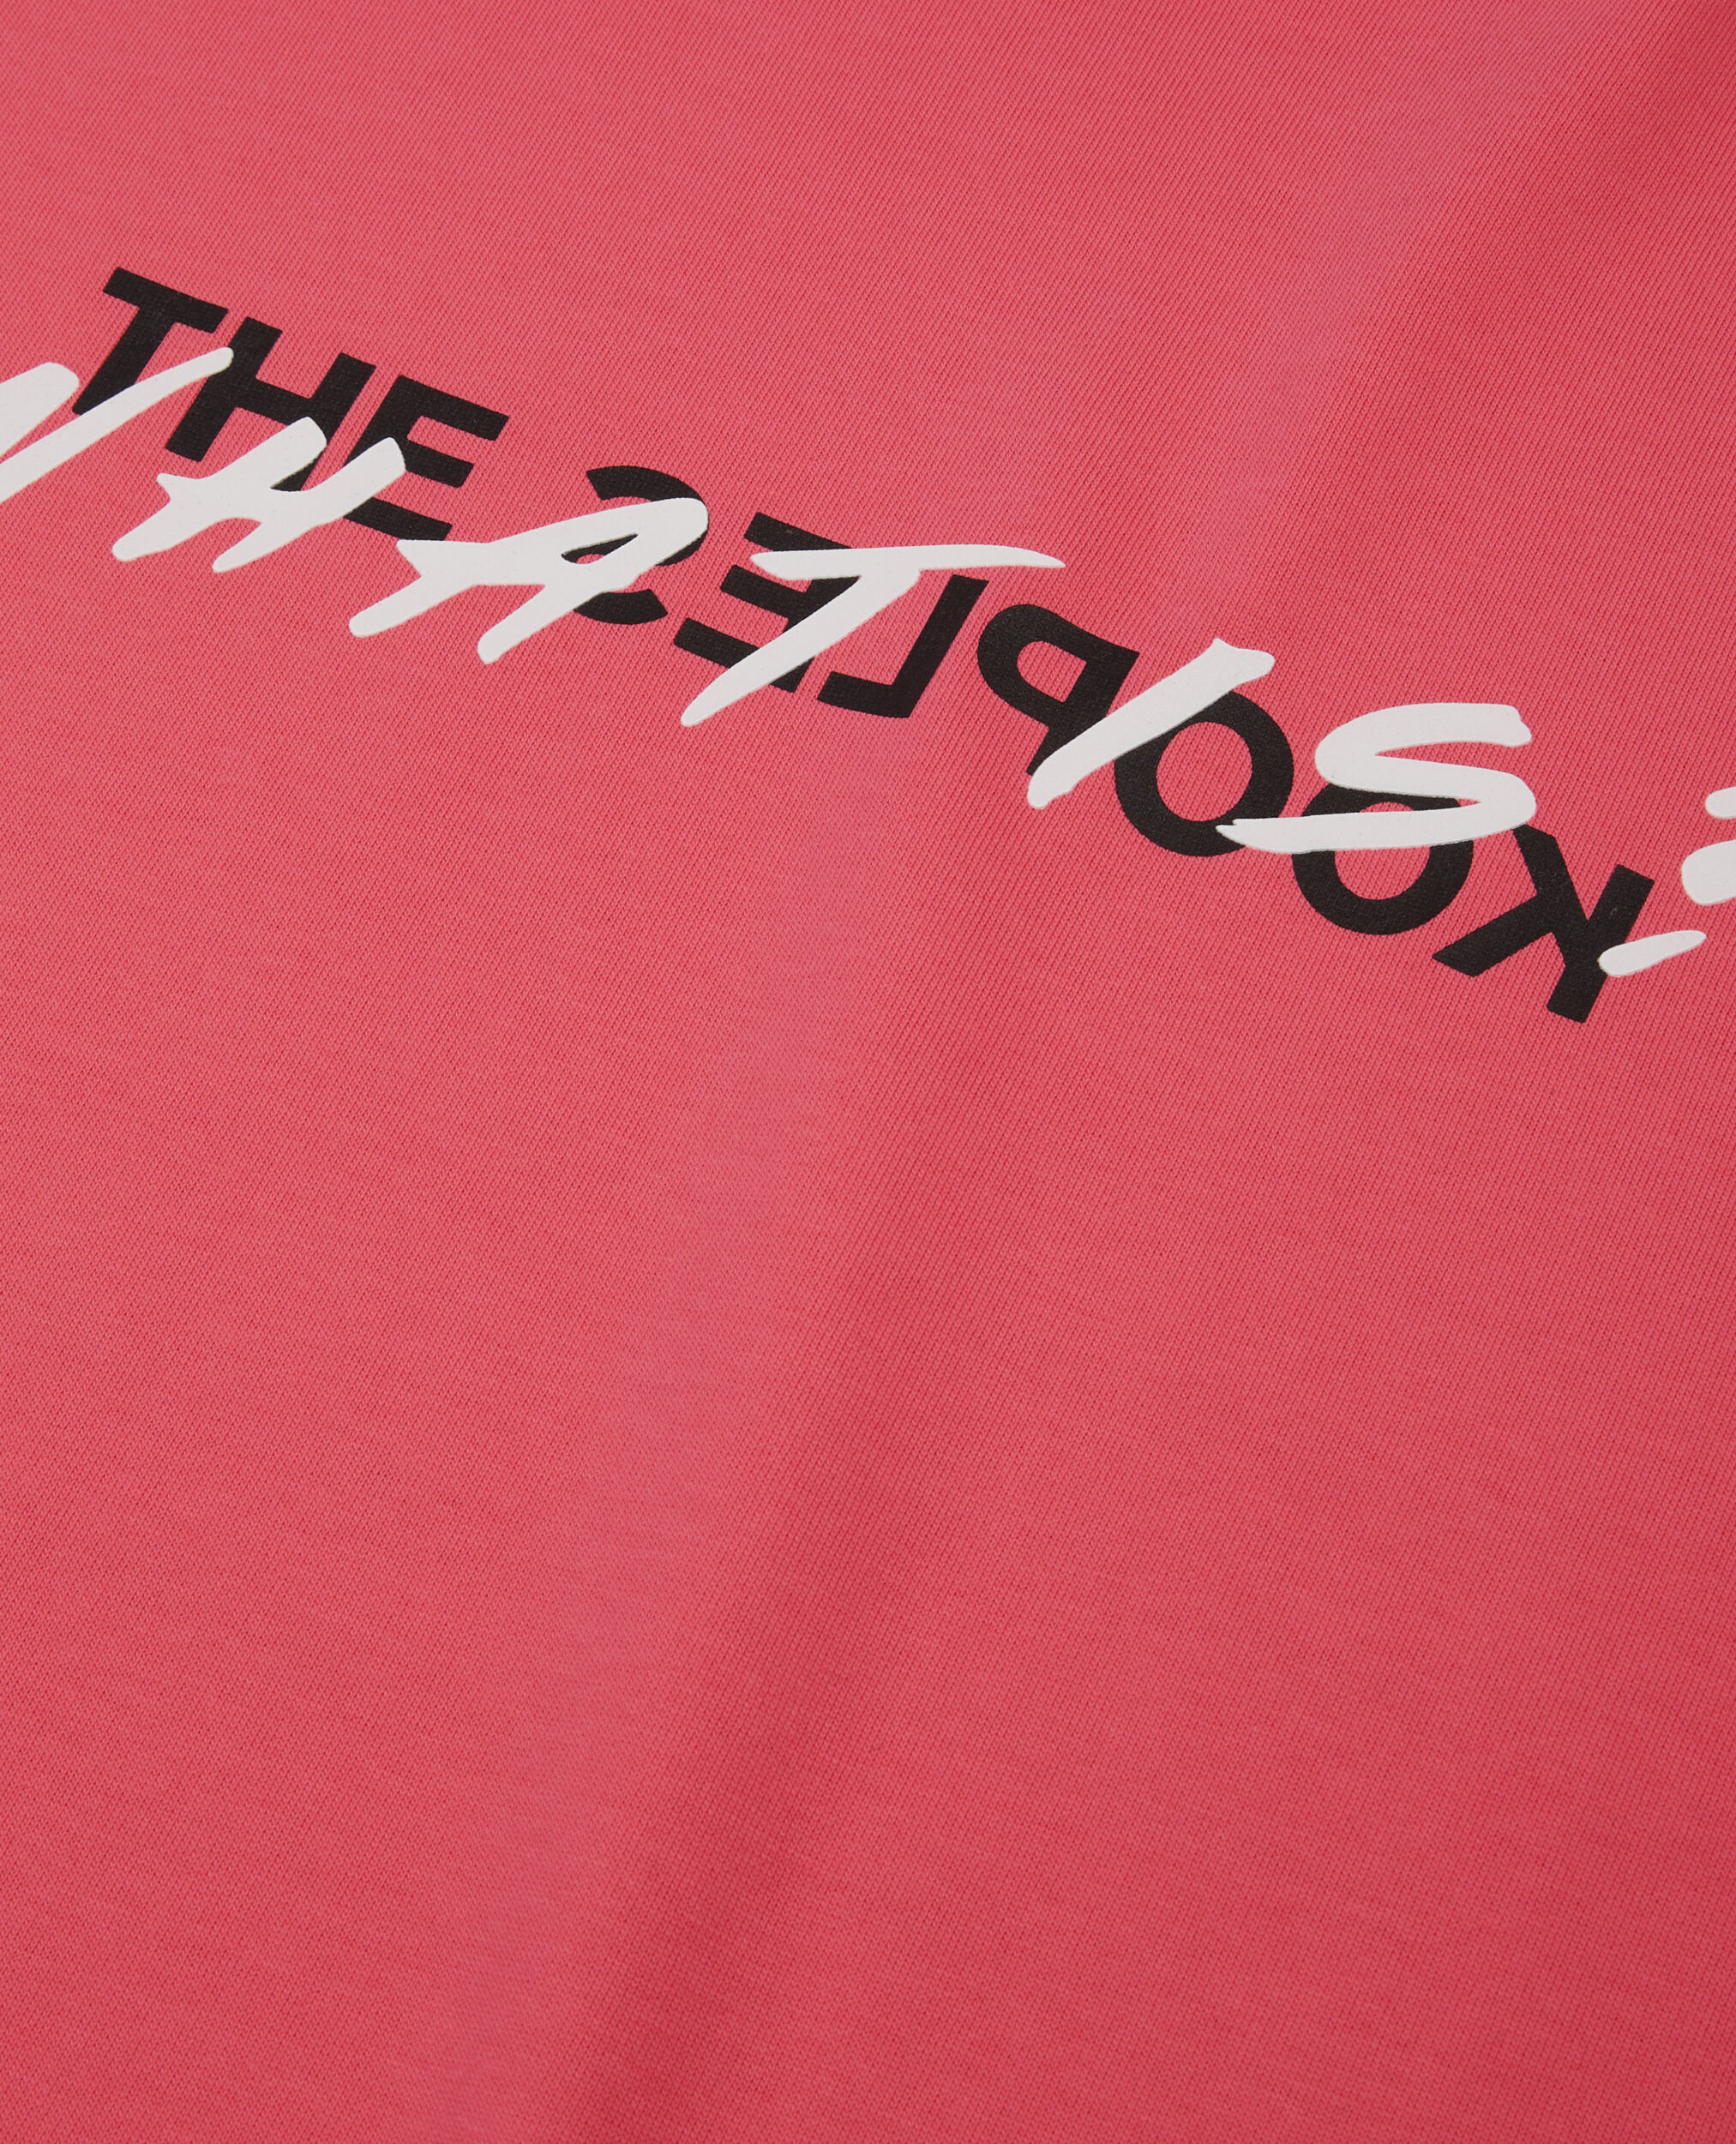 T-shirt What is rose, RETRO PINK, hi-res image number null